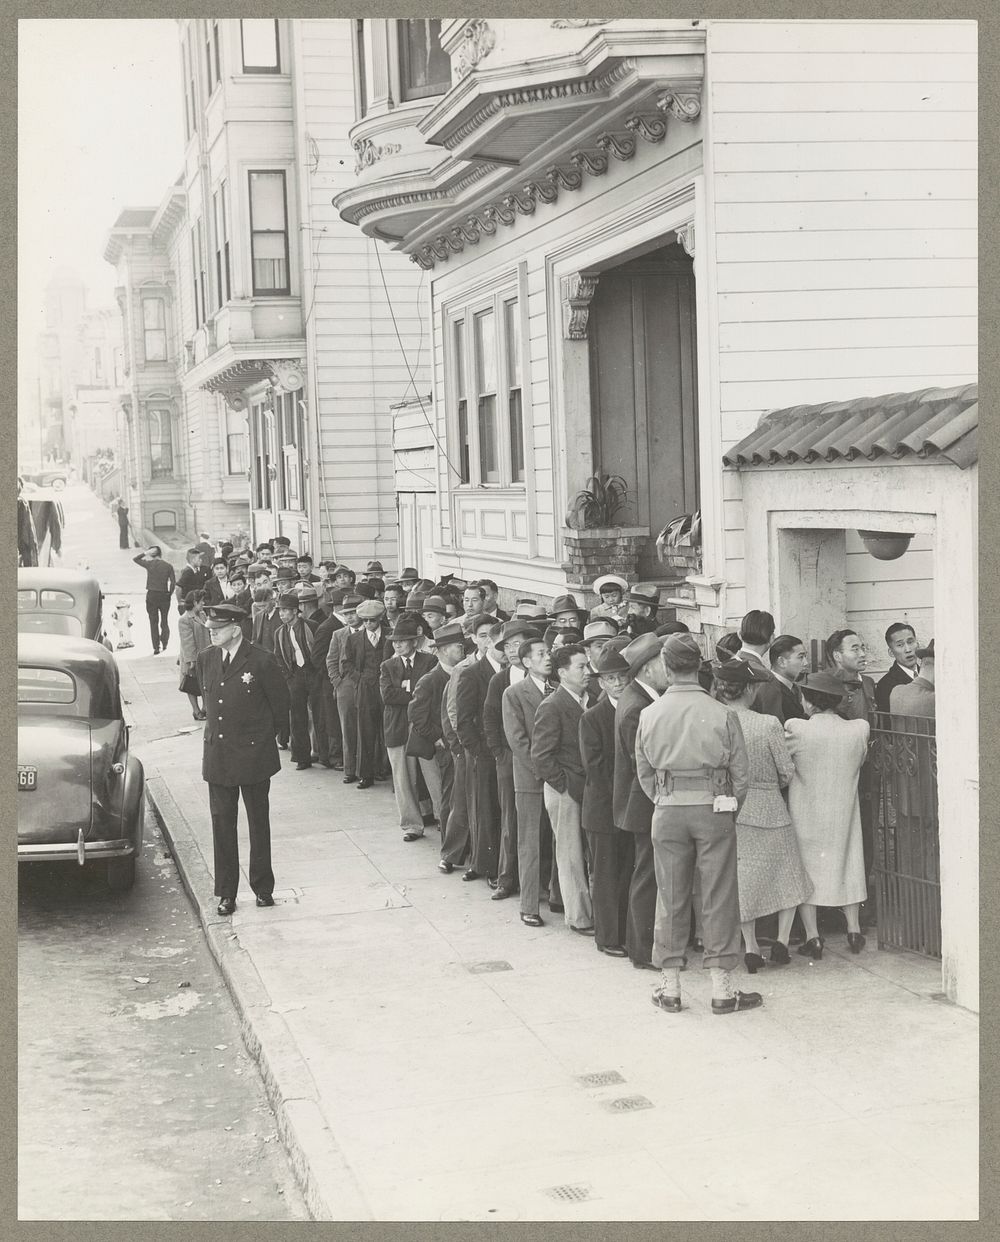 San Francisco, Calif. Apr. 1942. Evacuees of Japanese ancestry lining up before Japanese-American Citizens League to…